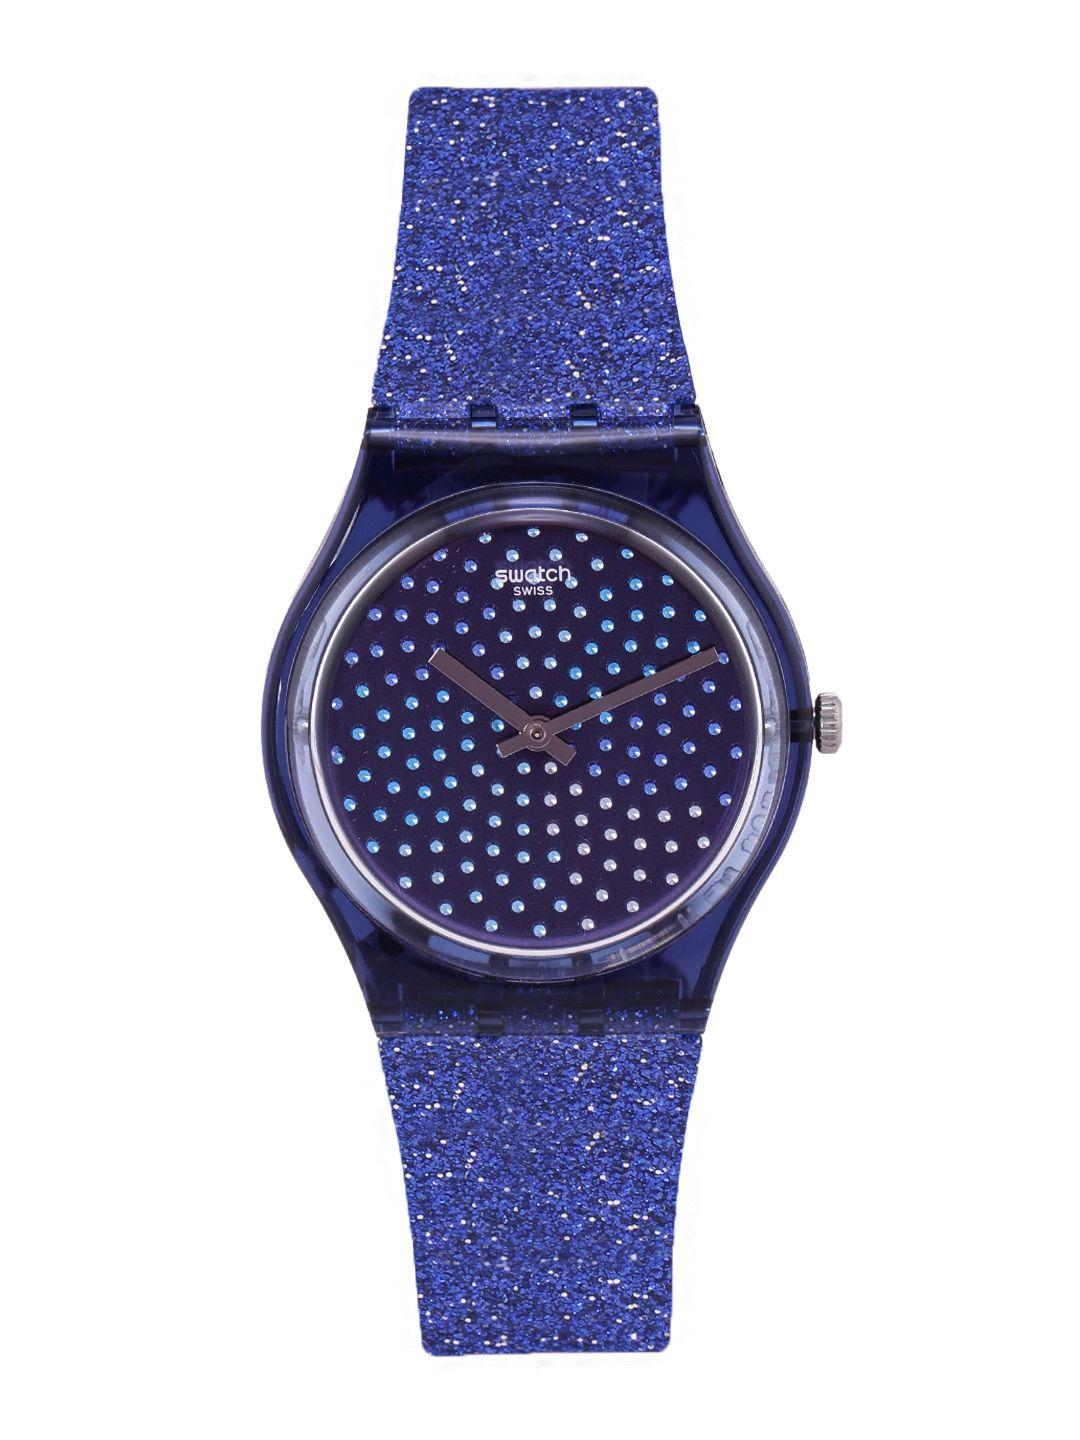 swatch-women-navy-blue-embellished-blumino-water-resistant-analogue-watch-gn270